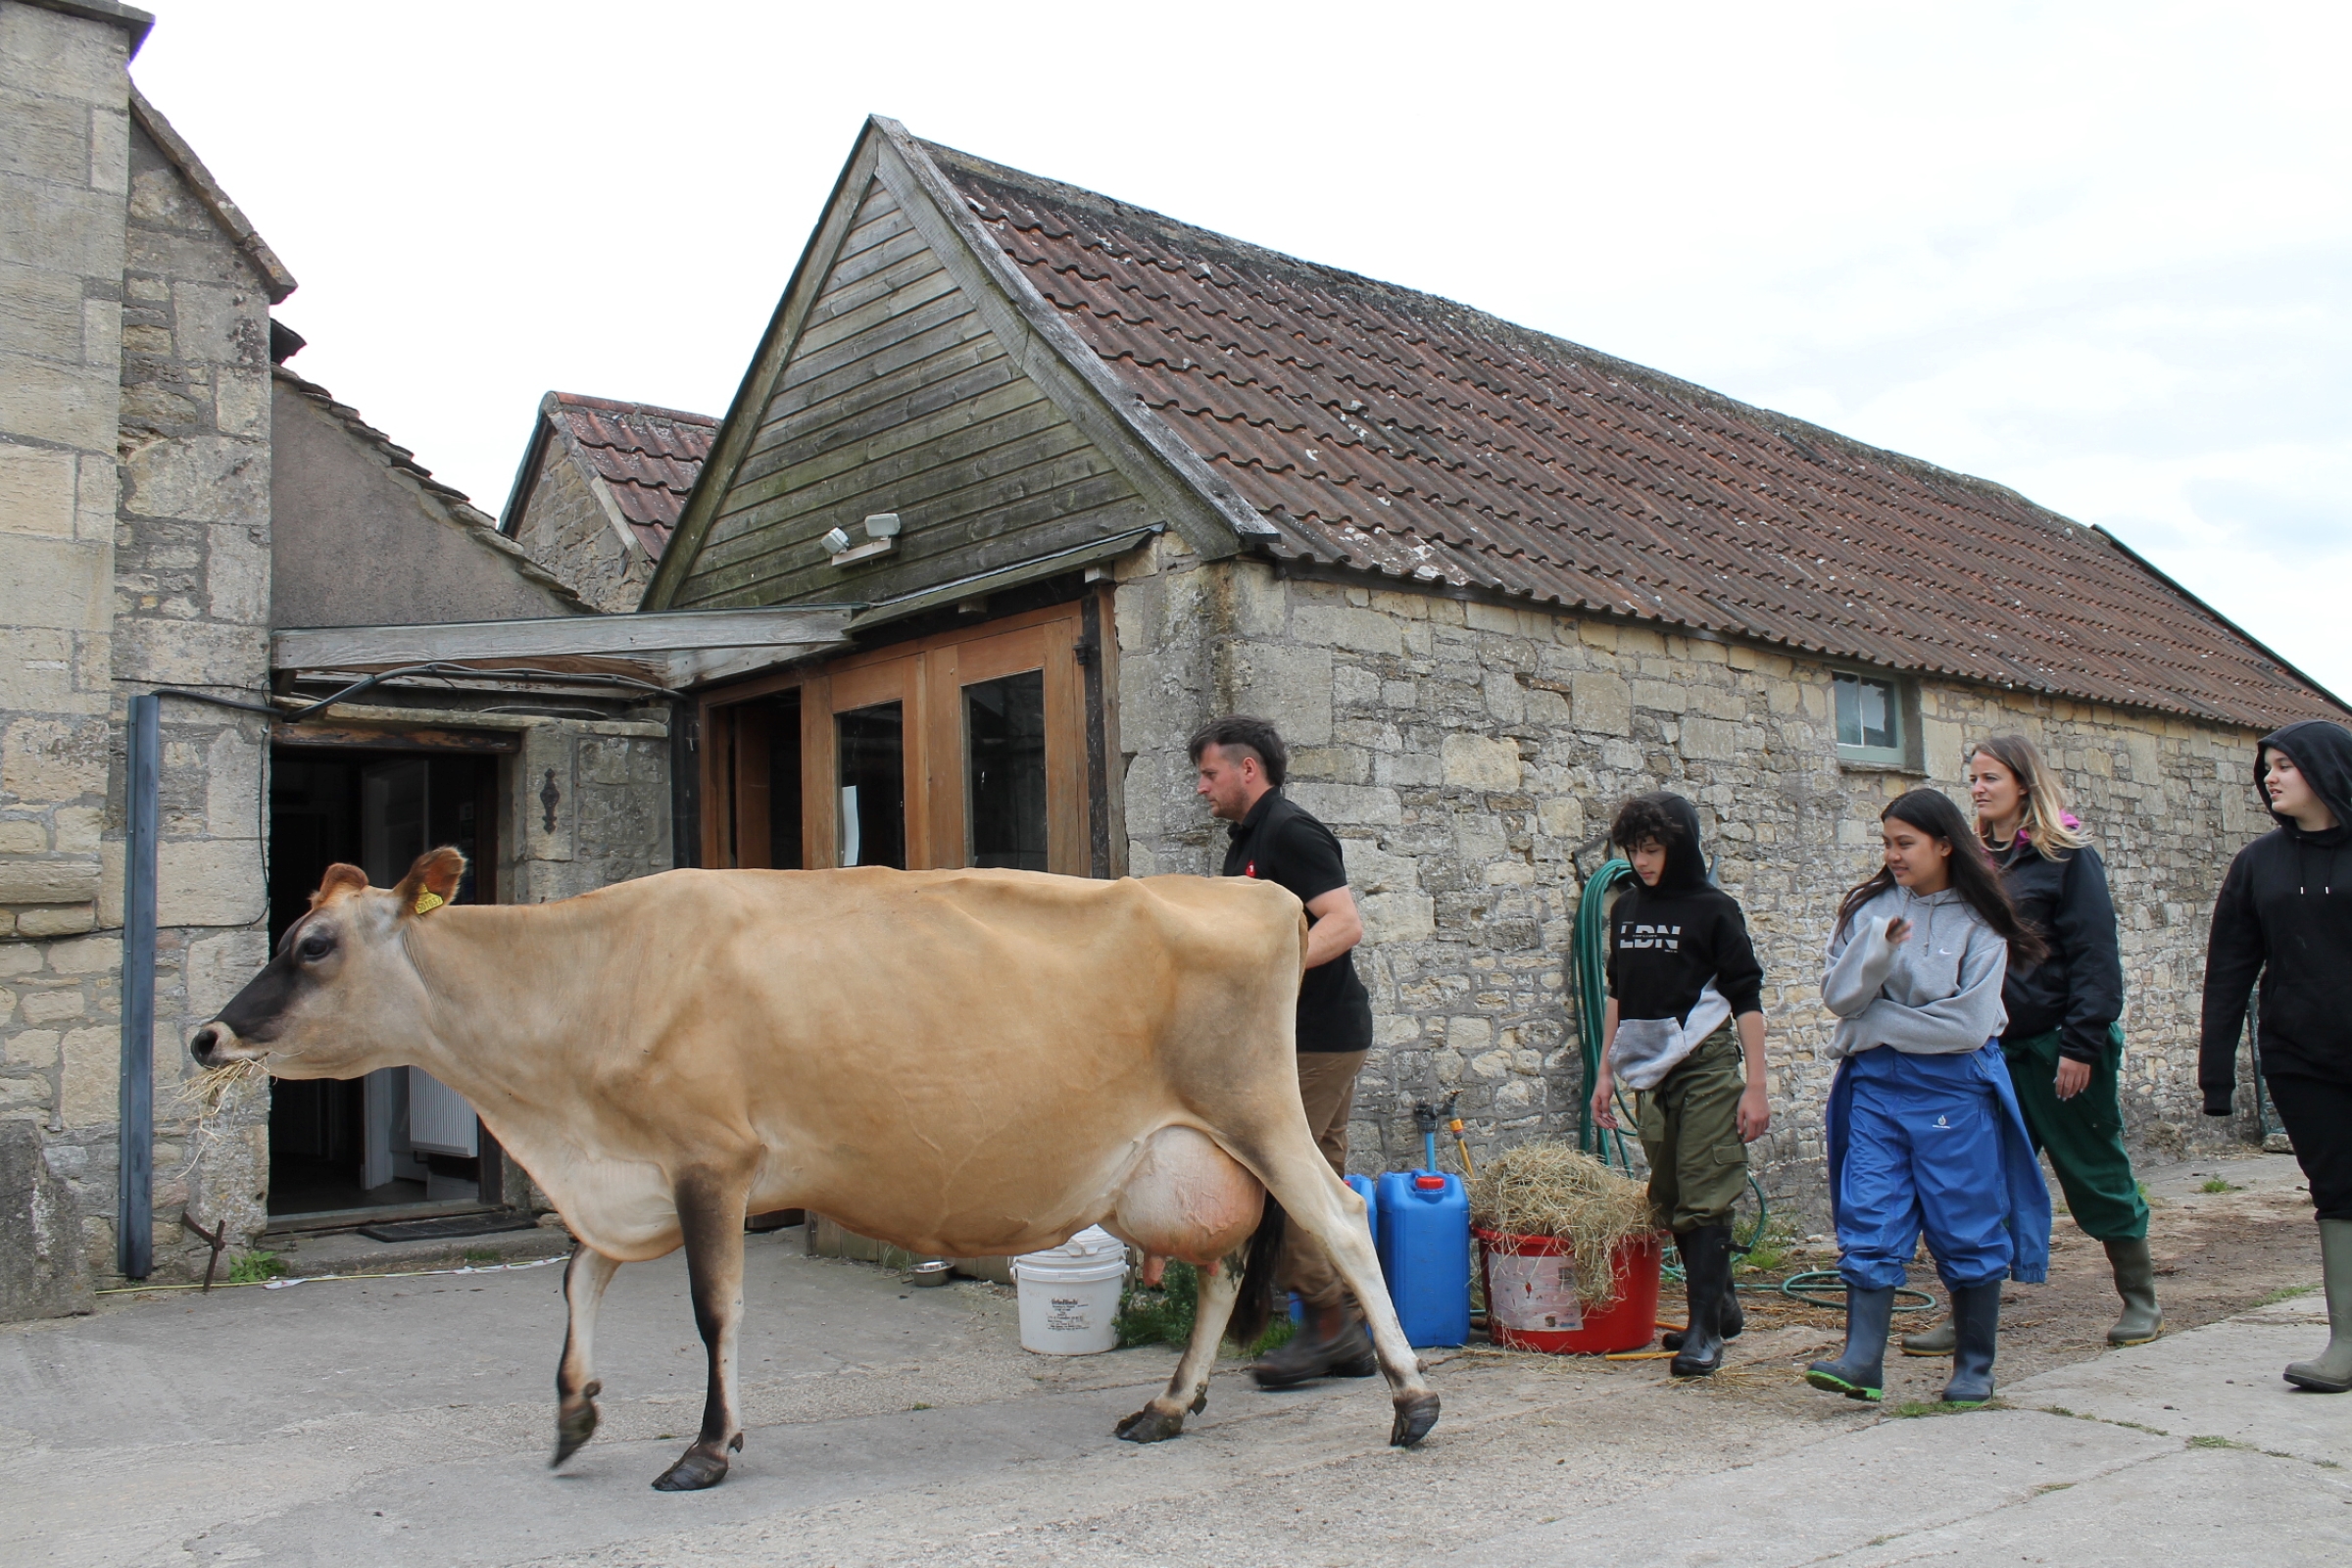 Three young people walking across the farm with a dairy cow